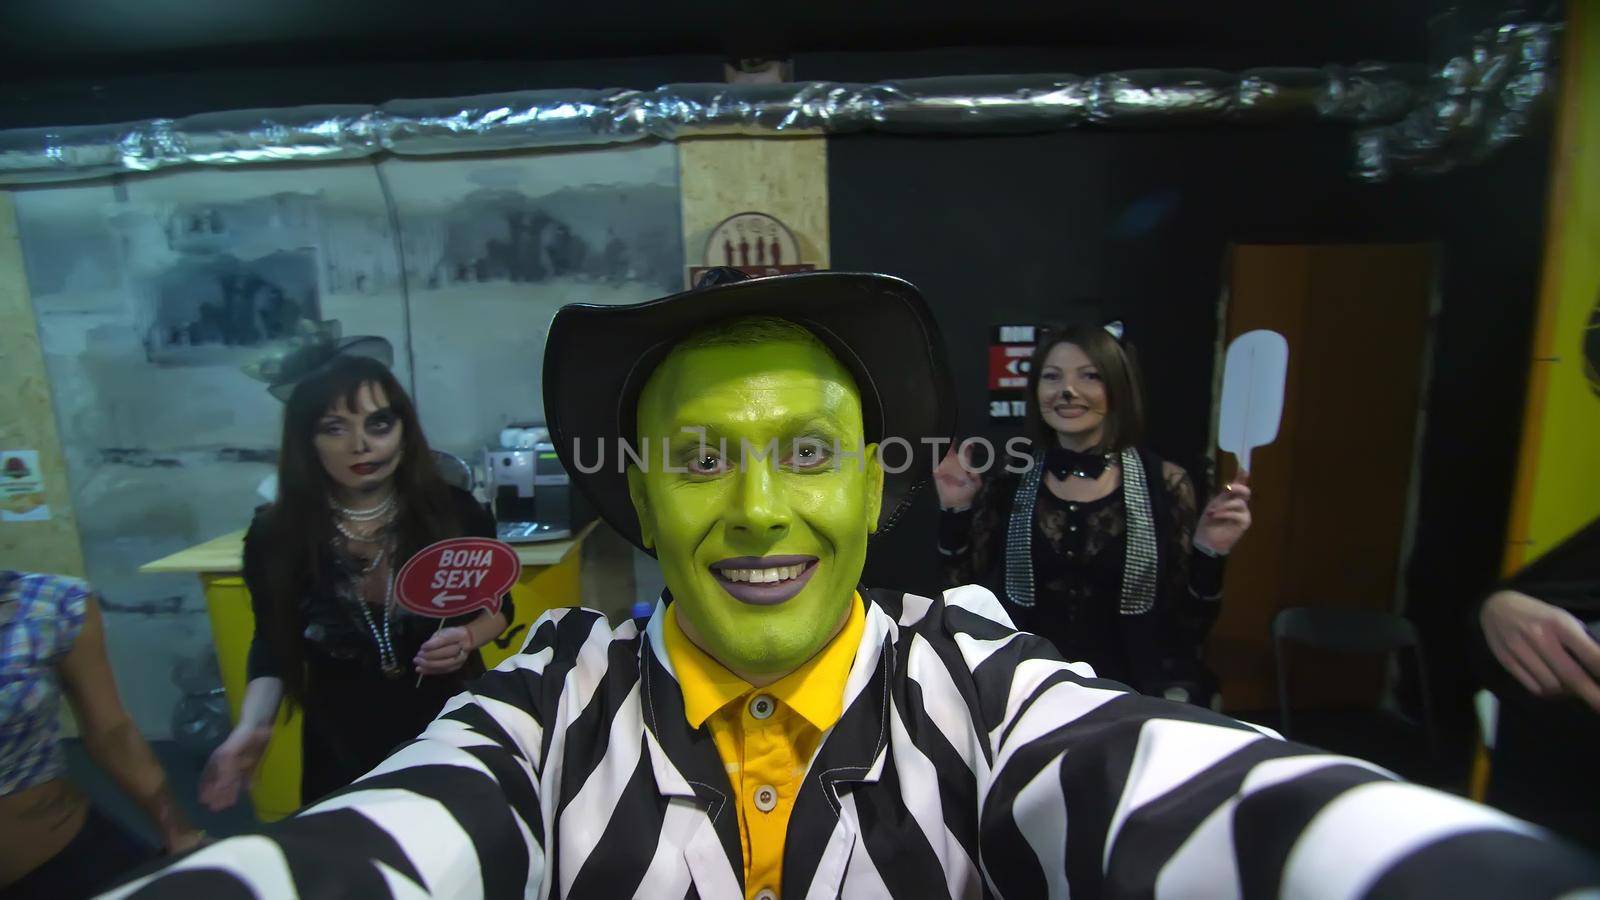 Halloween party, night, portrait of a man with a green face, wearing a hat, with a terrible makeup , croaks in front of the camera, in the background Halloween scenery is seen by djtreneryay